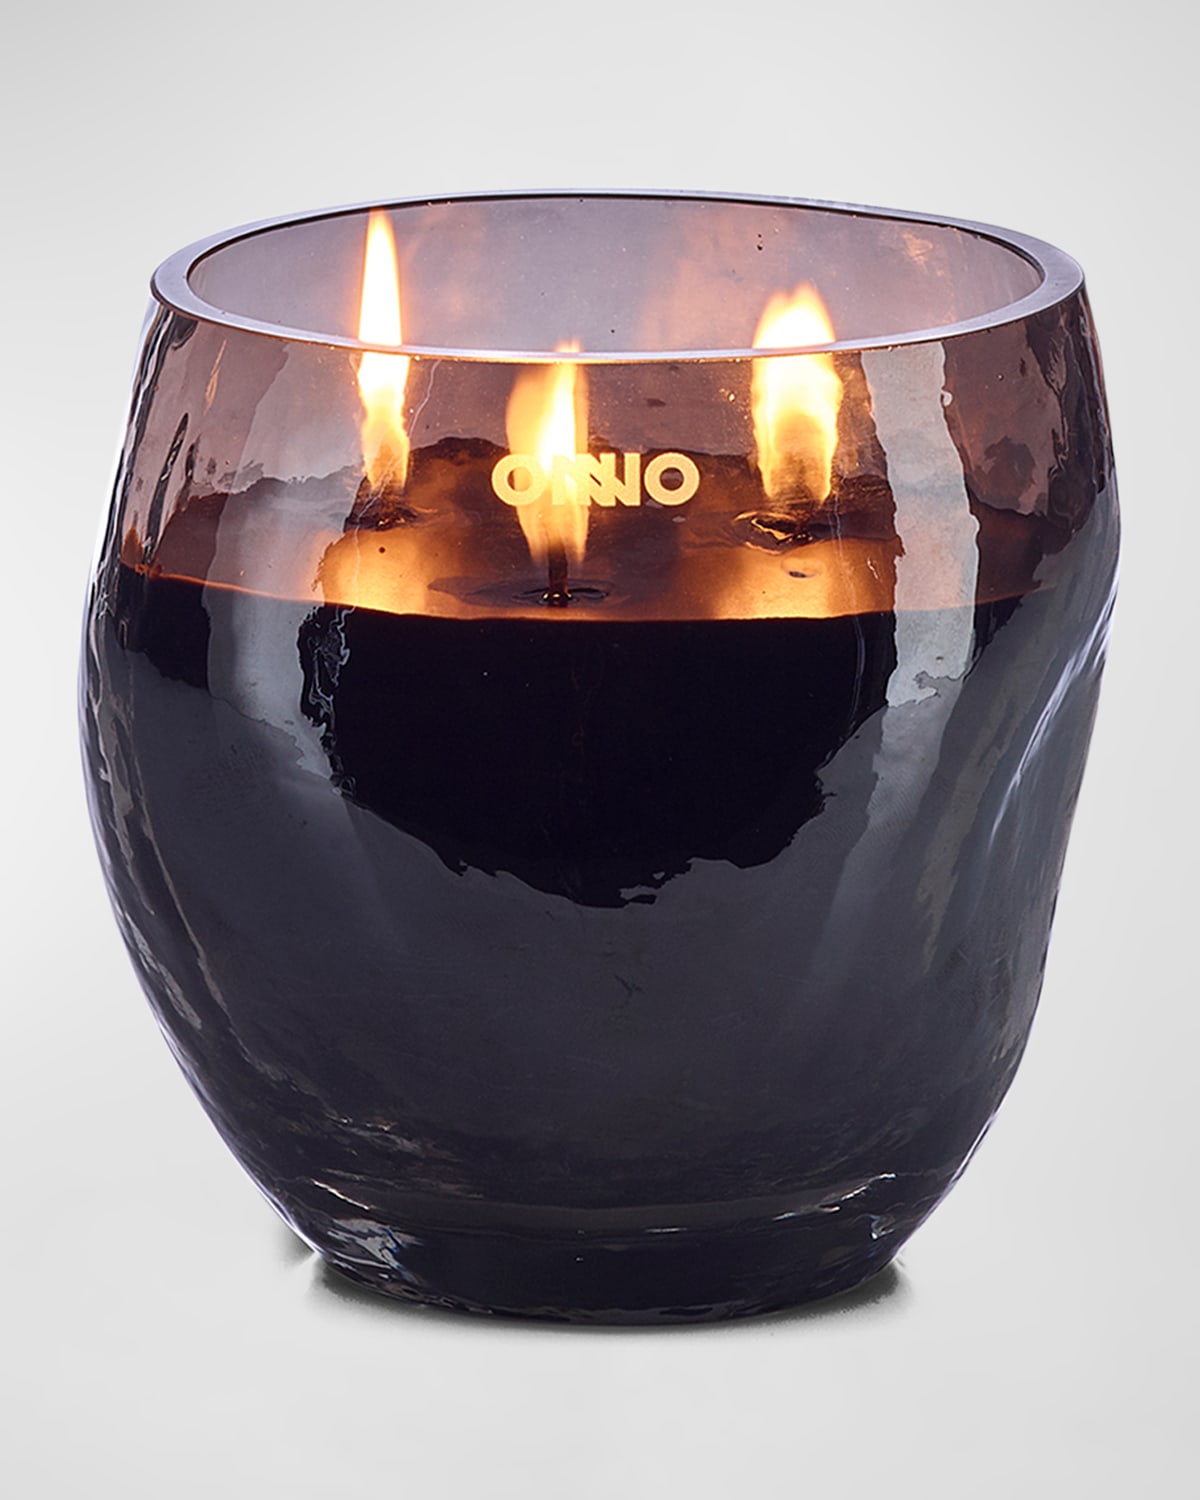 Onno Collection Small Cape Smoked Grey Muse Candle, 1400g In Blue